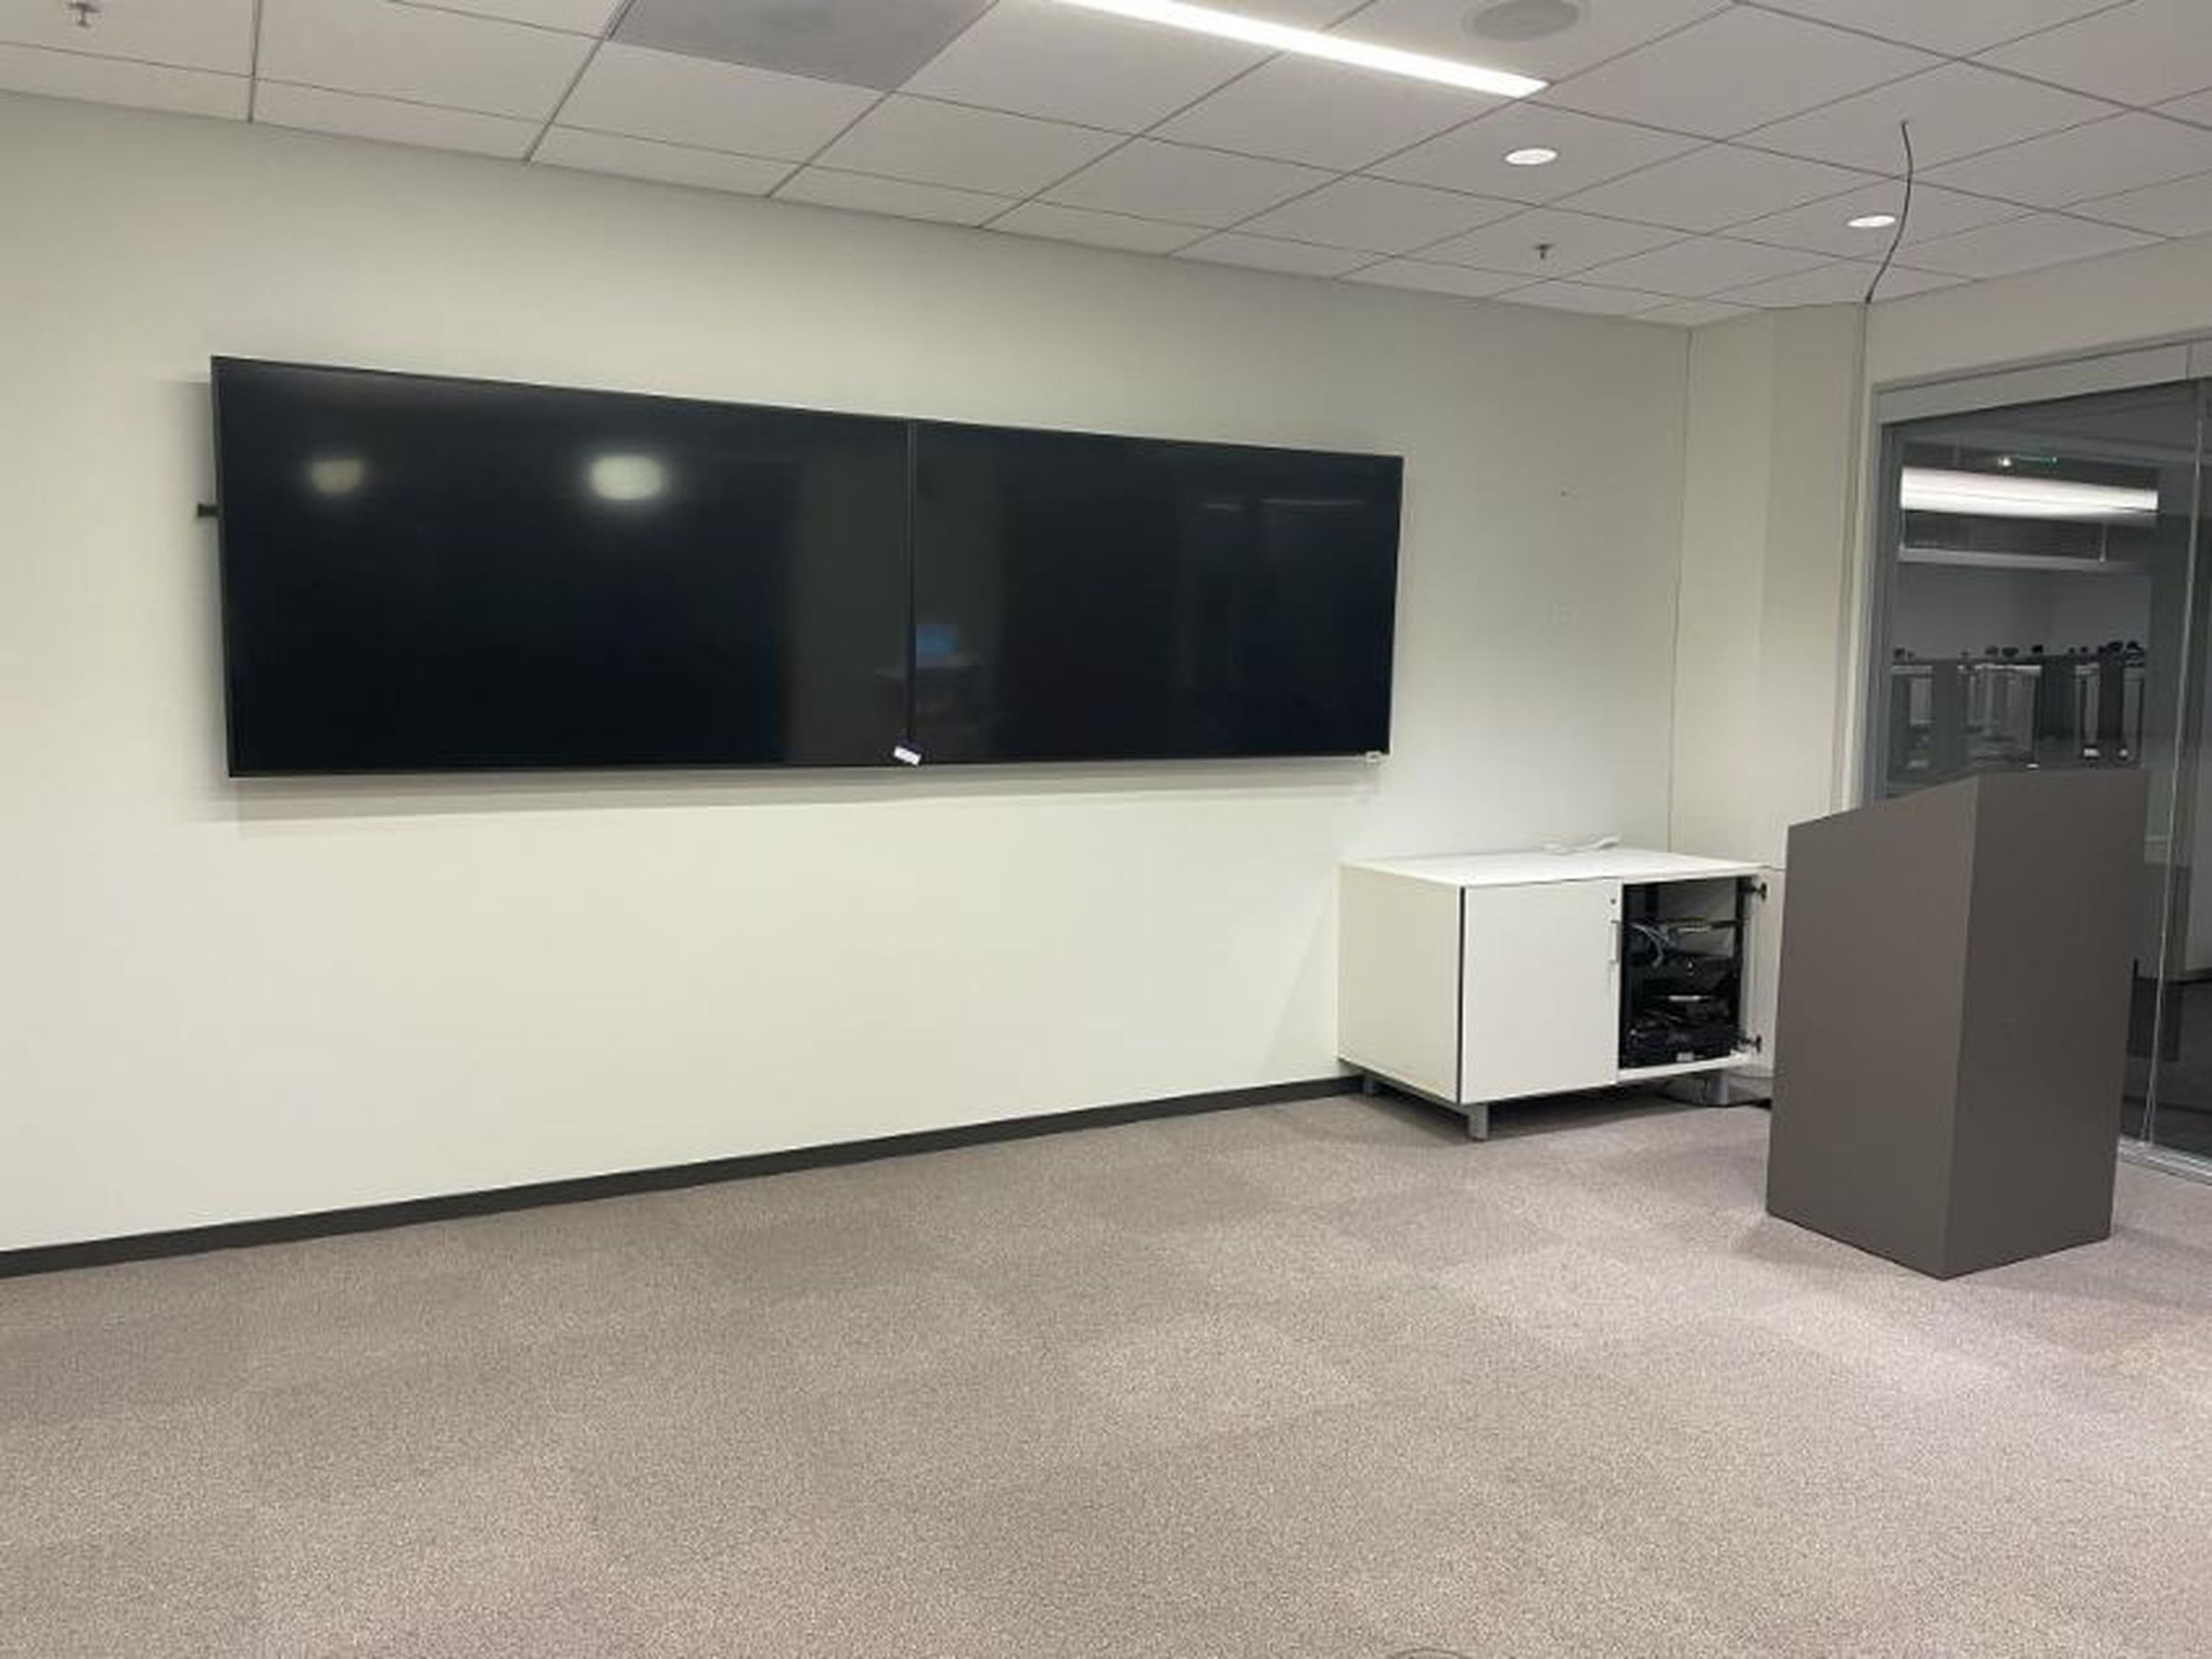 Two 75-inch wall-mounted Samsung displays